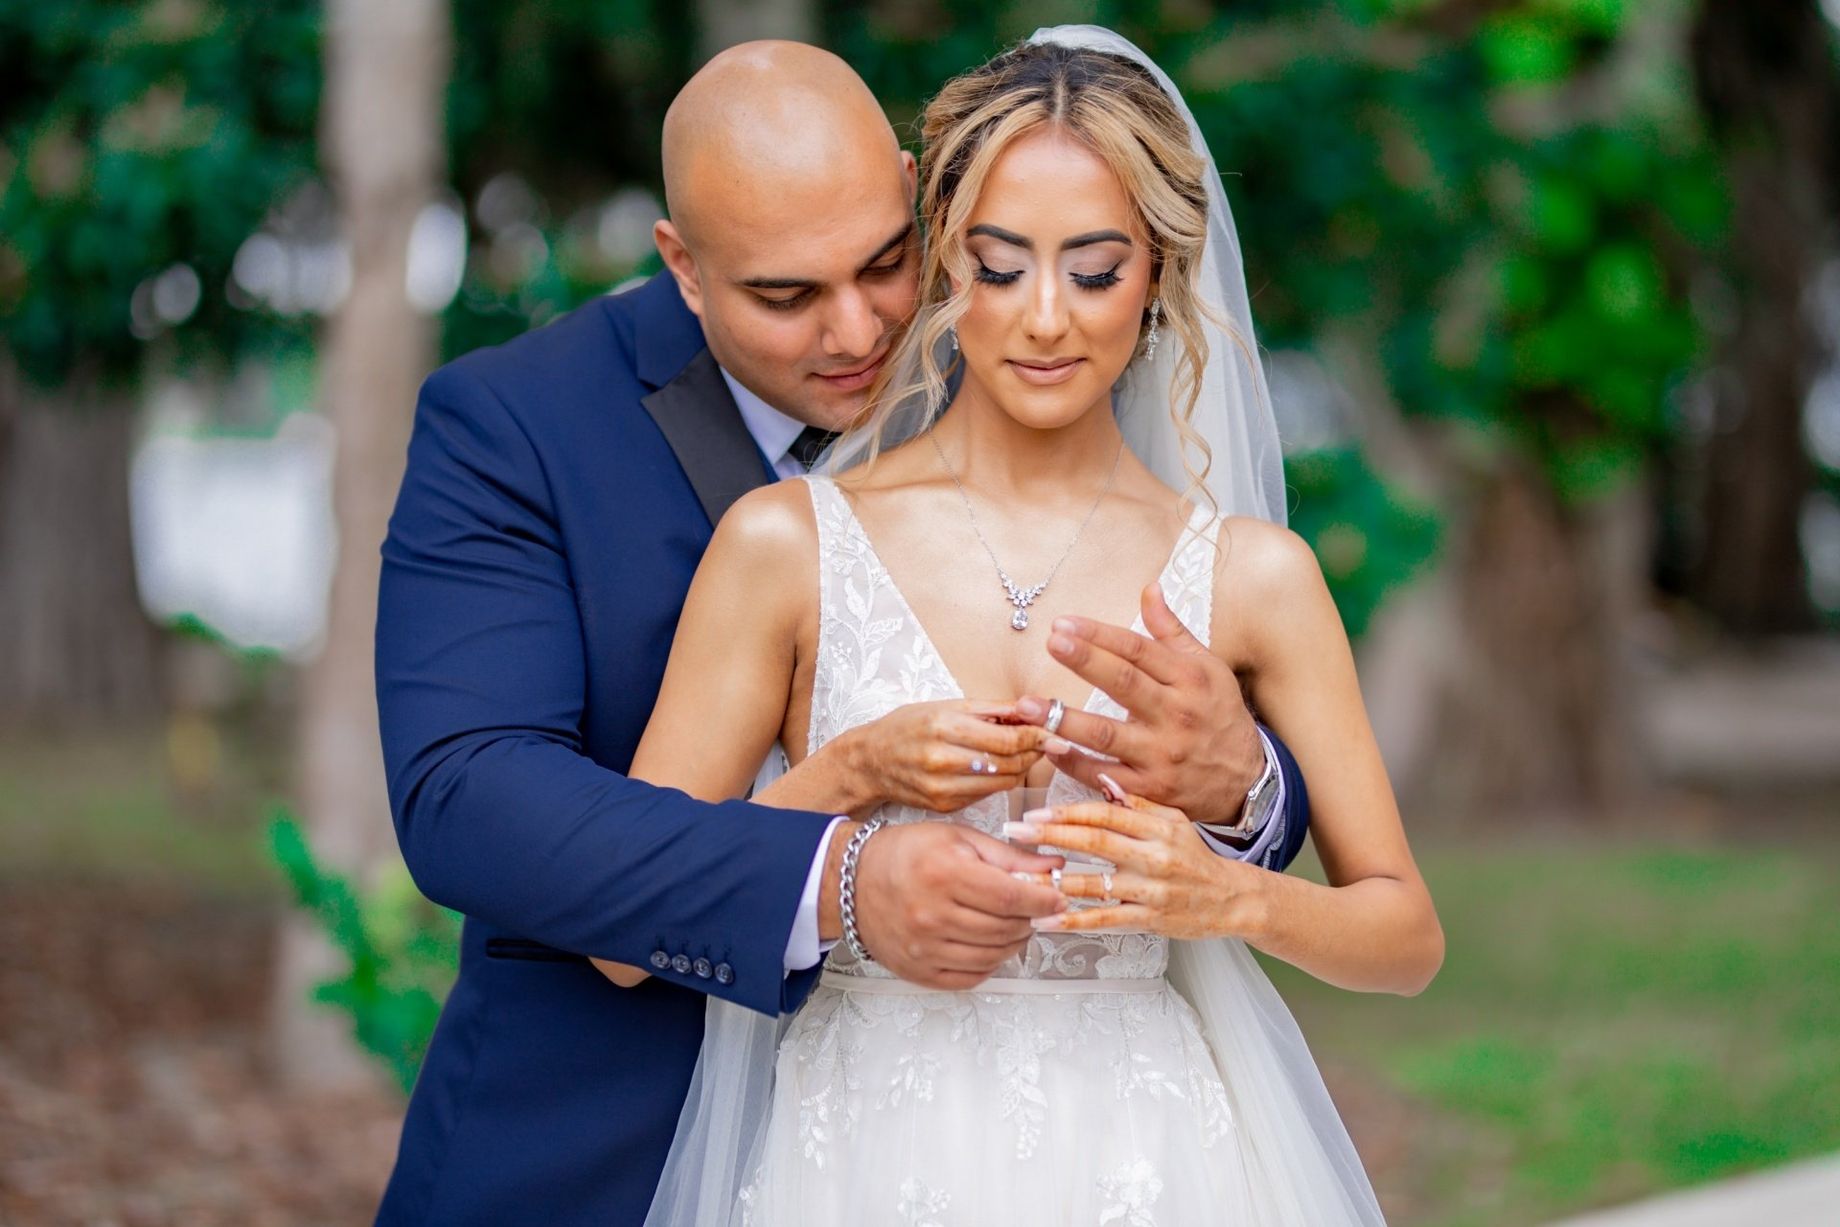 Best Wedding Photographer in NYC | Best Affordable NY Long Island Queens Brooklyn Bronx NJ Photographer | Wedding Photo Shoots